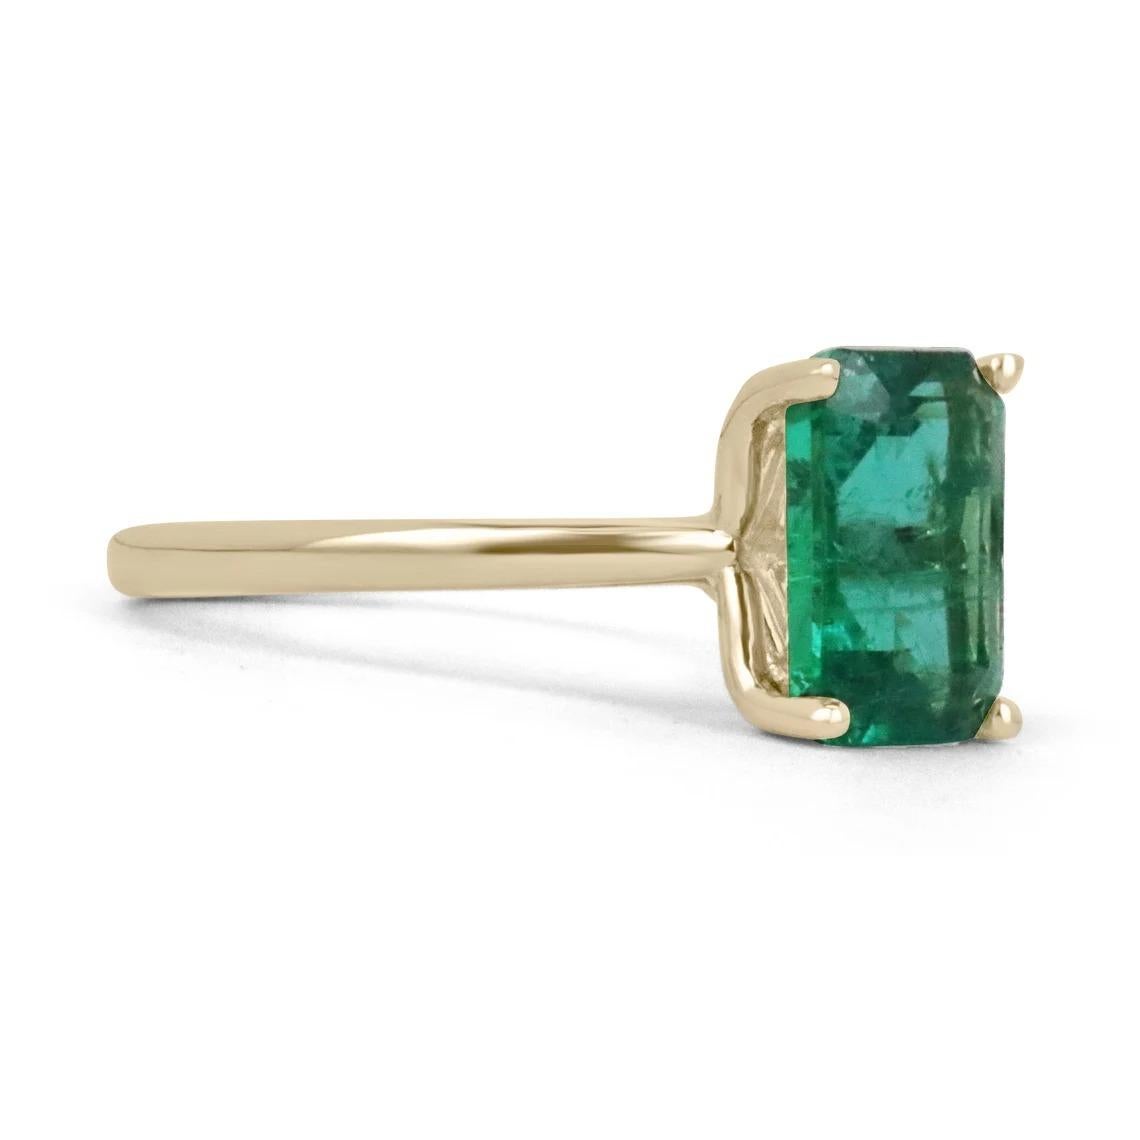 Displayed is a classic emerald solitaire engagement or right-hand ring. This spectacular piece features a remarkable 2.80-carat, natural emerald cut emerald from the origins of Zambia. The center stone showcases a rich, rare, dark vivid green color